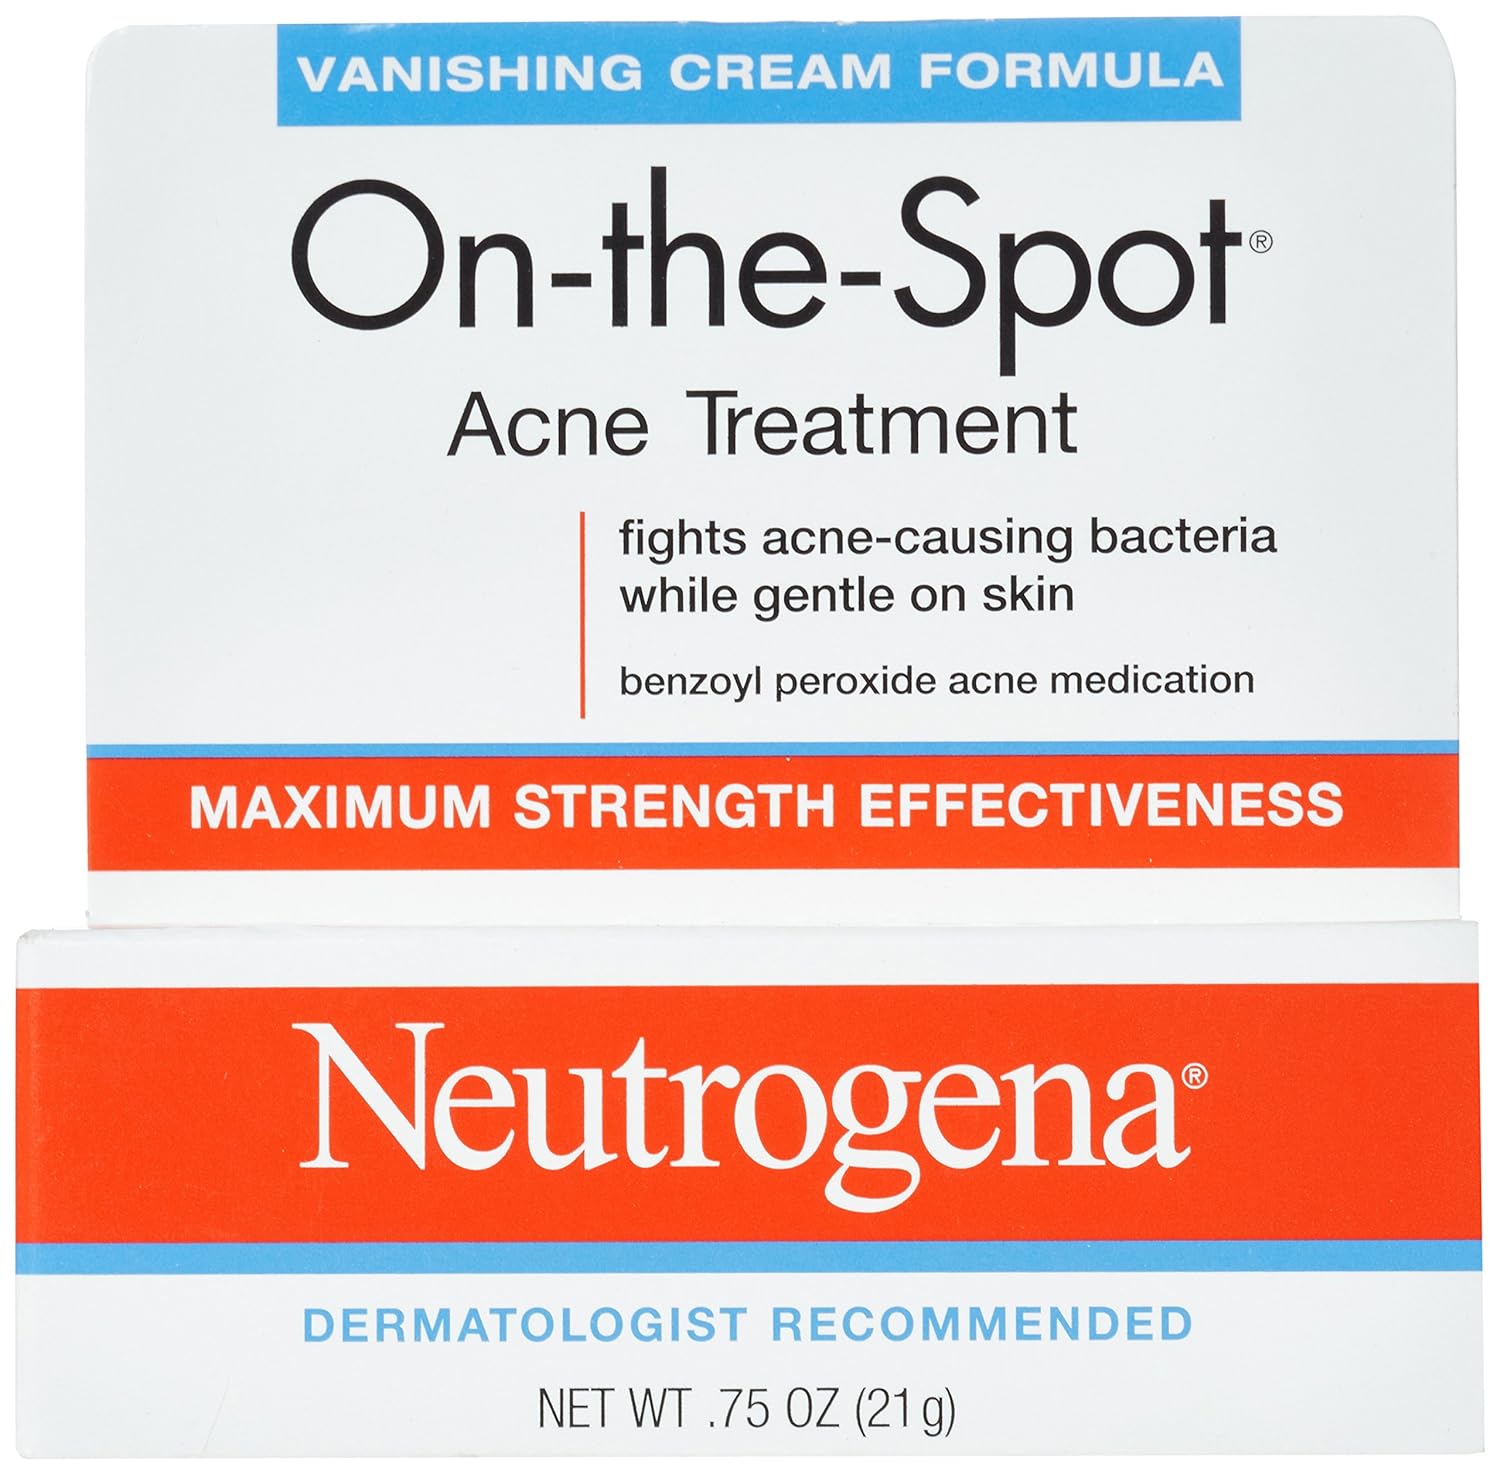 Neutrogena On-The-Spot Acne Spot Treatment with 2.5% Benzoyl Peroxide Acne Treatment Medication to Treat Face Acne, Gentle Benzoyl Peroxide Pimple Cream for Acne Prone Skin Care.75 oz